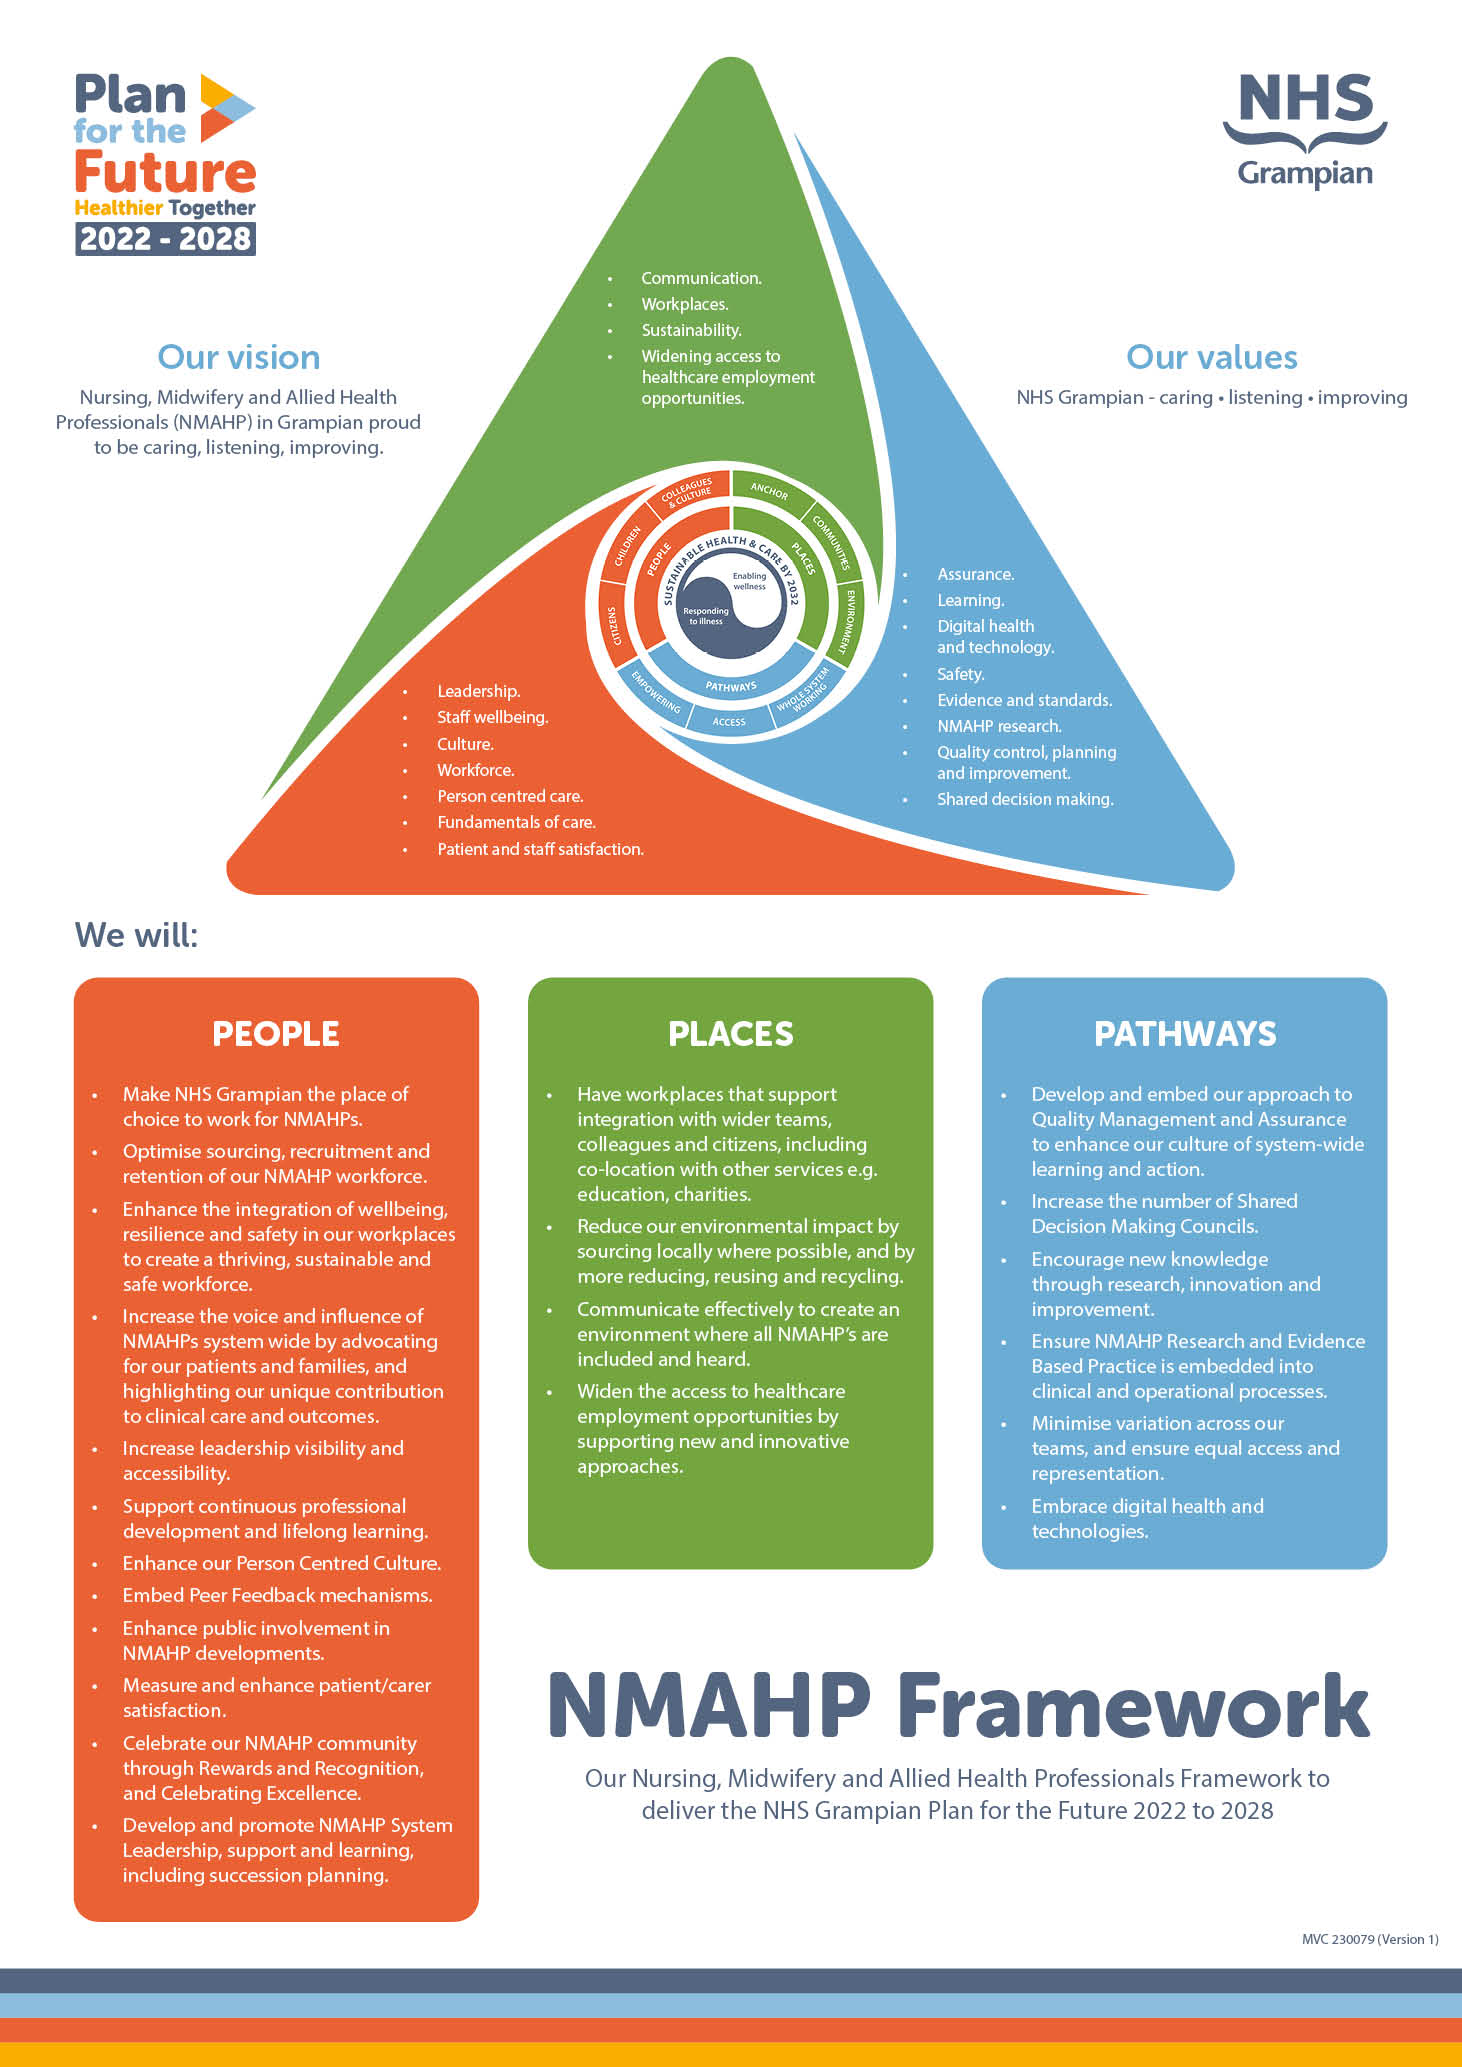 The NHS Grampian Nursing, Midwifery and Allied Health Professionals framework outlining their priorities from 2022 to 2028